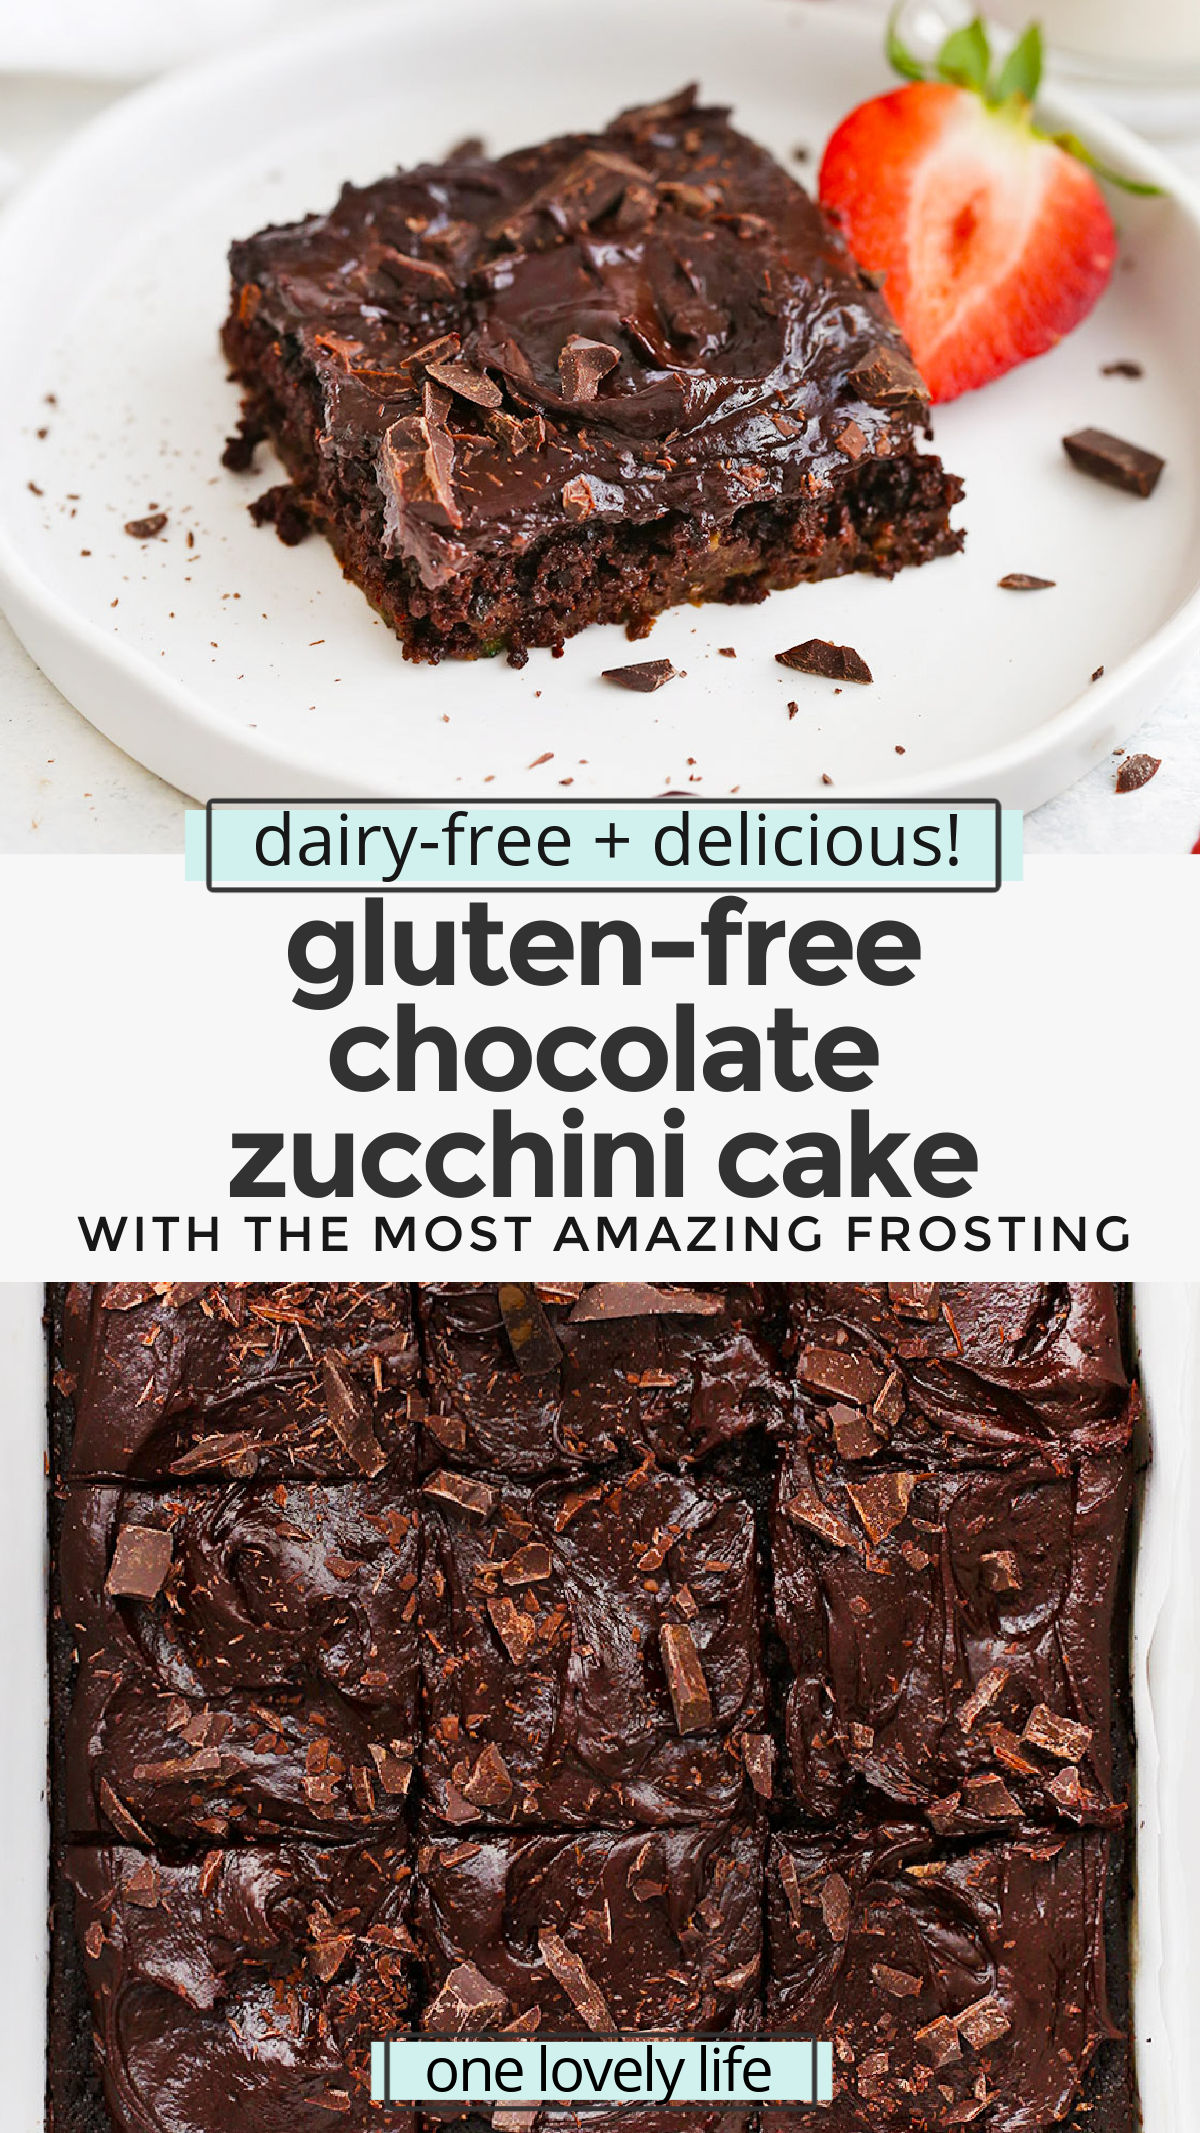 The BEST Gluten Free Chocolate Zucchini Cake. This gorgeous almond flour chocolate zucchini cake is packed with chocolate flavor. It's rich and decadent and 100% naturally sweetened! You'll love the paleo chocolate frosting! // gluten free cake recipe // gluten free chocolate cake recipe // dairy free chocolate cake recipe // almond flour cake // gluten free zucchini cake recipe // paleo chocolate zucchini cake recipe